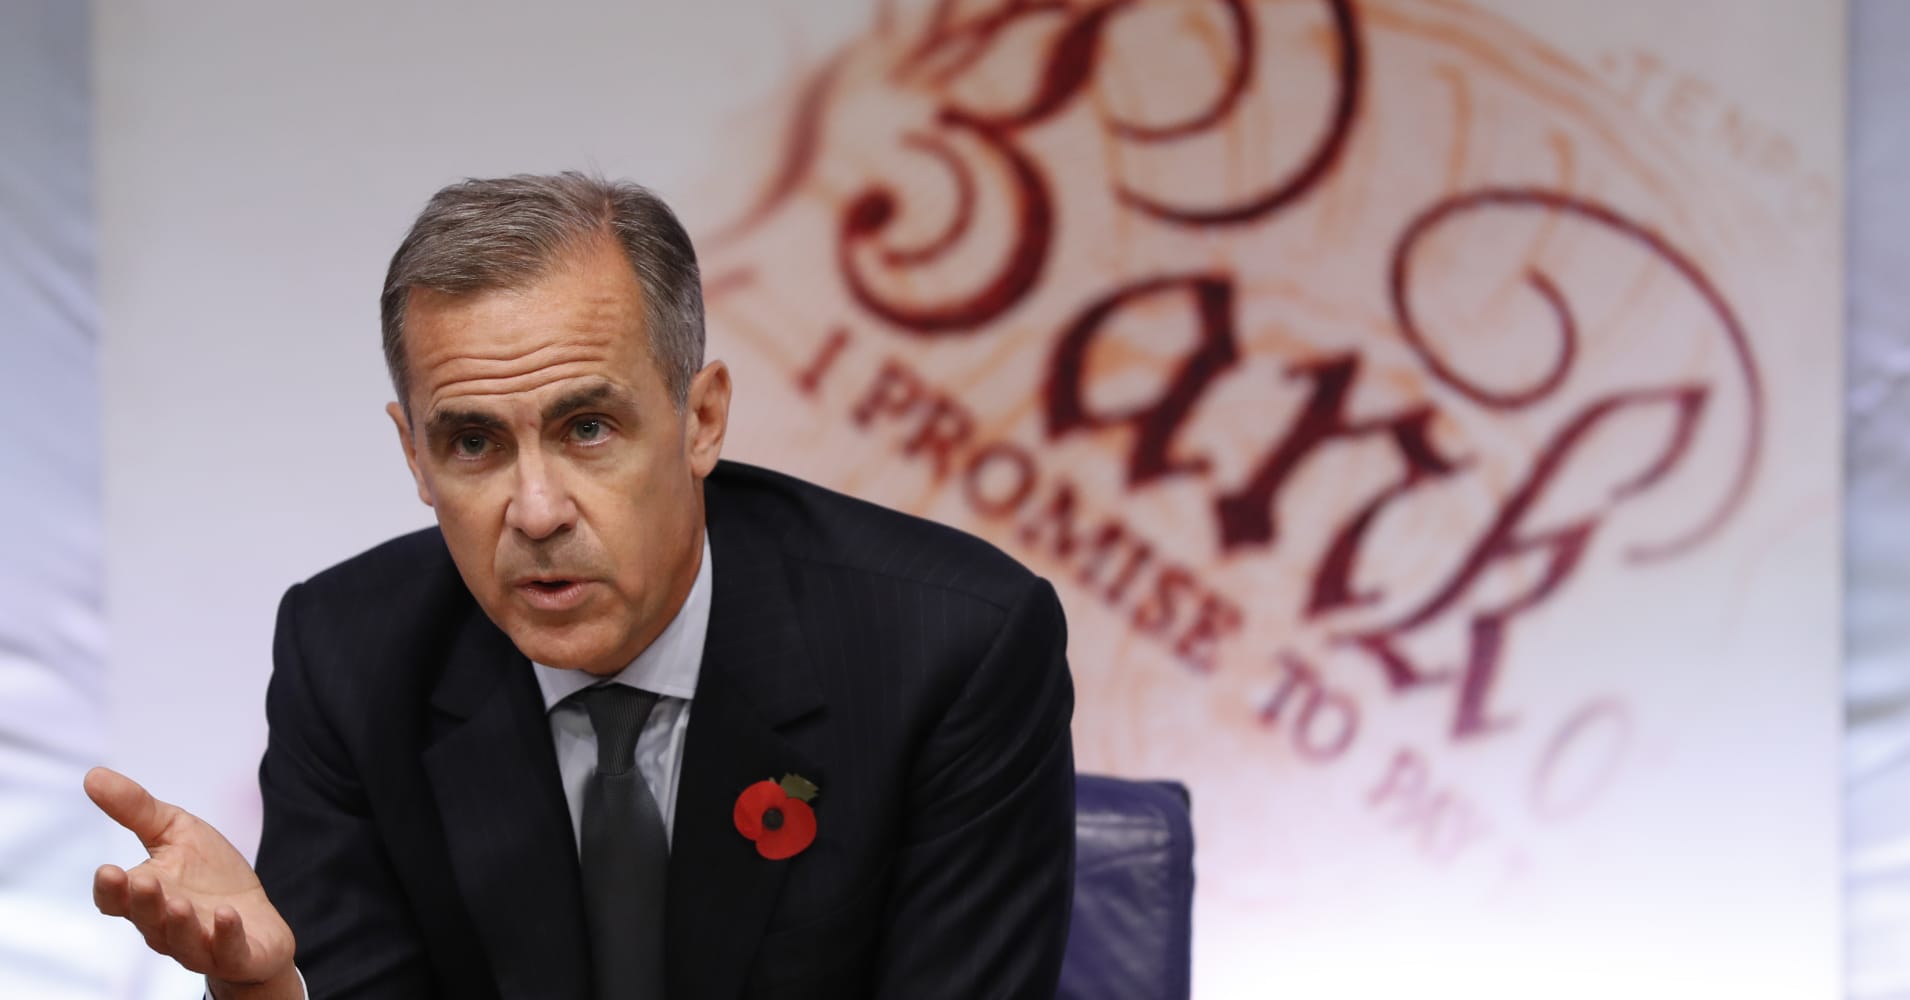 Bitcoin has 'pretty much failed' as a currency, Bank of England Governor Carney says